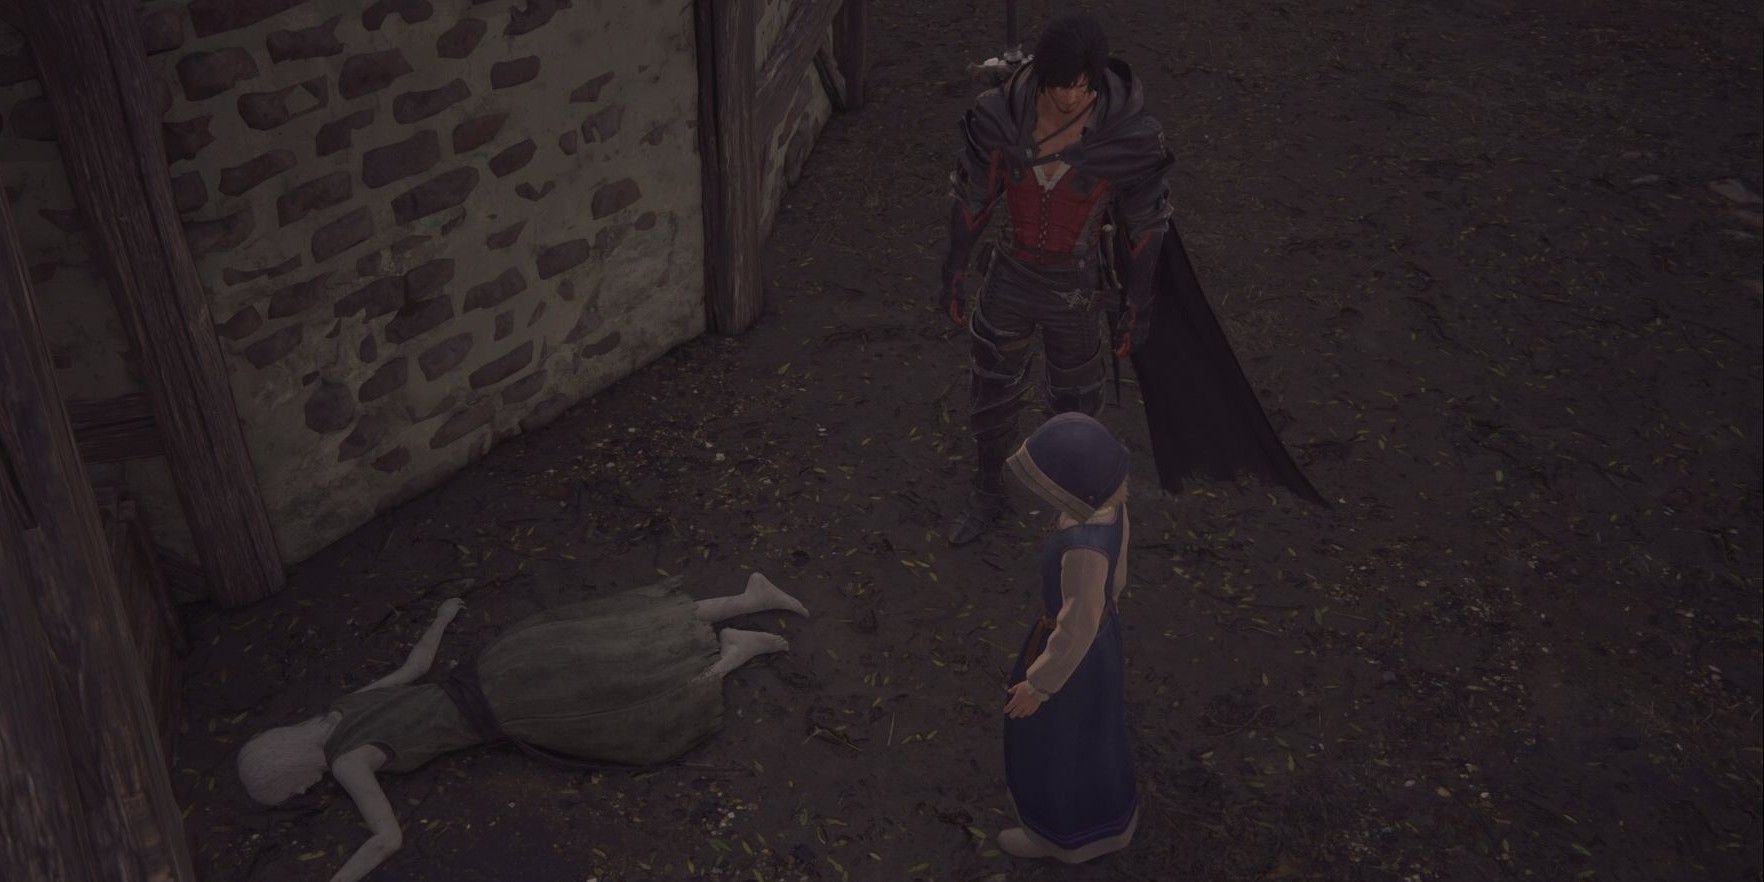 Final Fantasy 16 screenshot of Clive and a young girl standing near Chloe's corpse